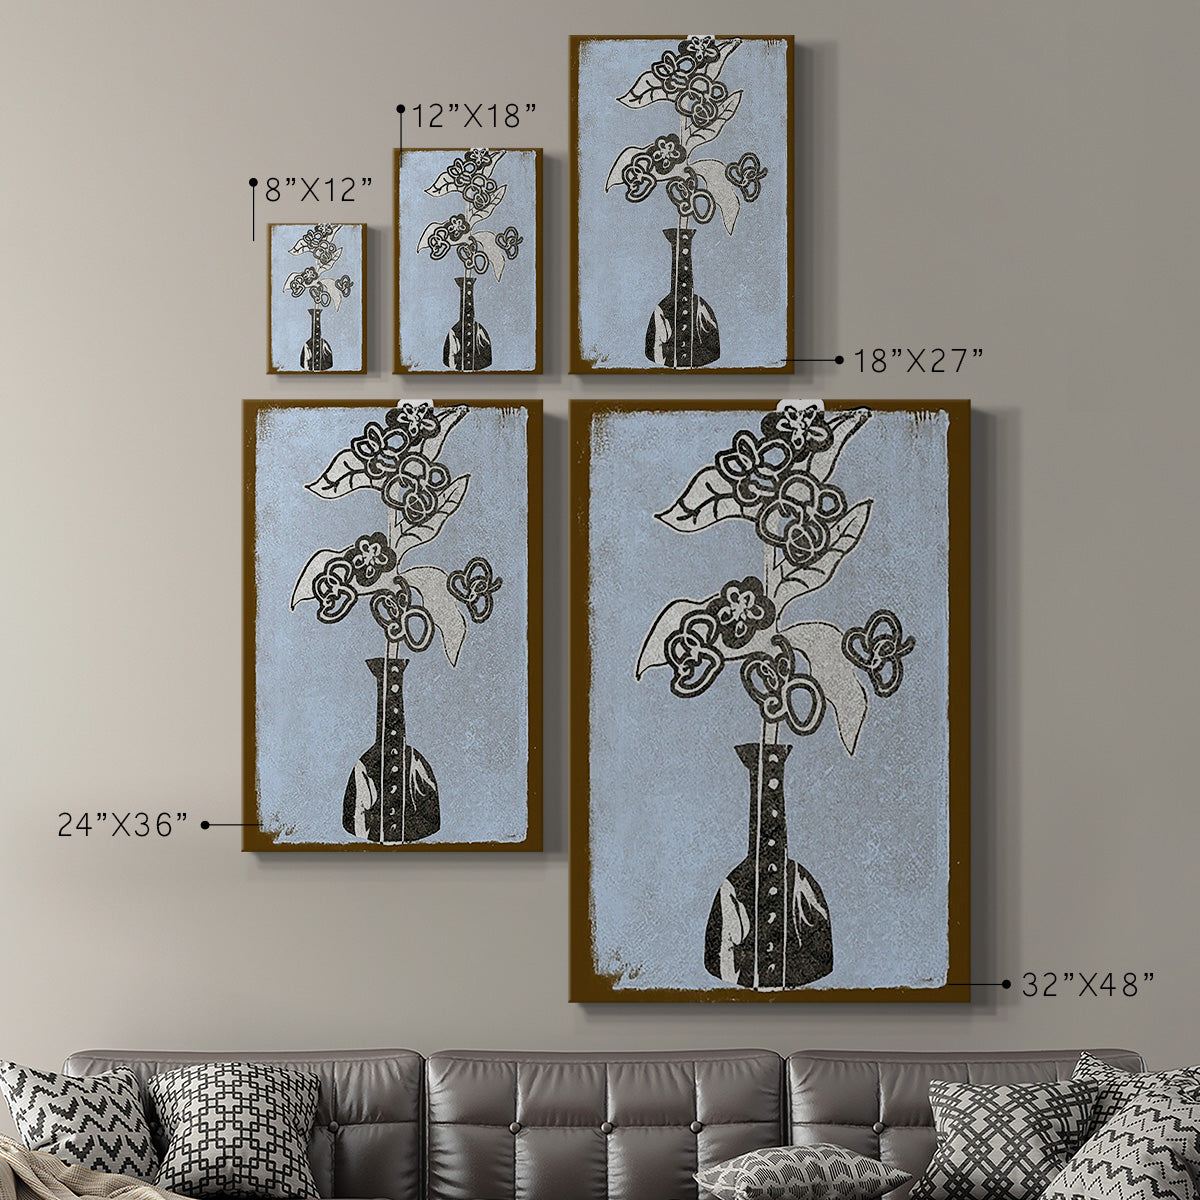 Graphic Flowers in Vase III Premium Gallery Wrapped Canvas - Ready to Hang